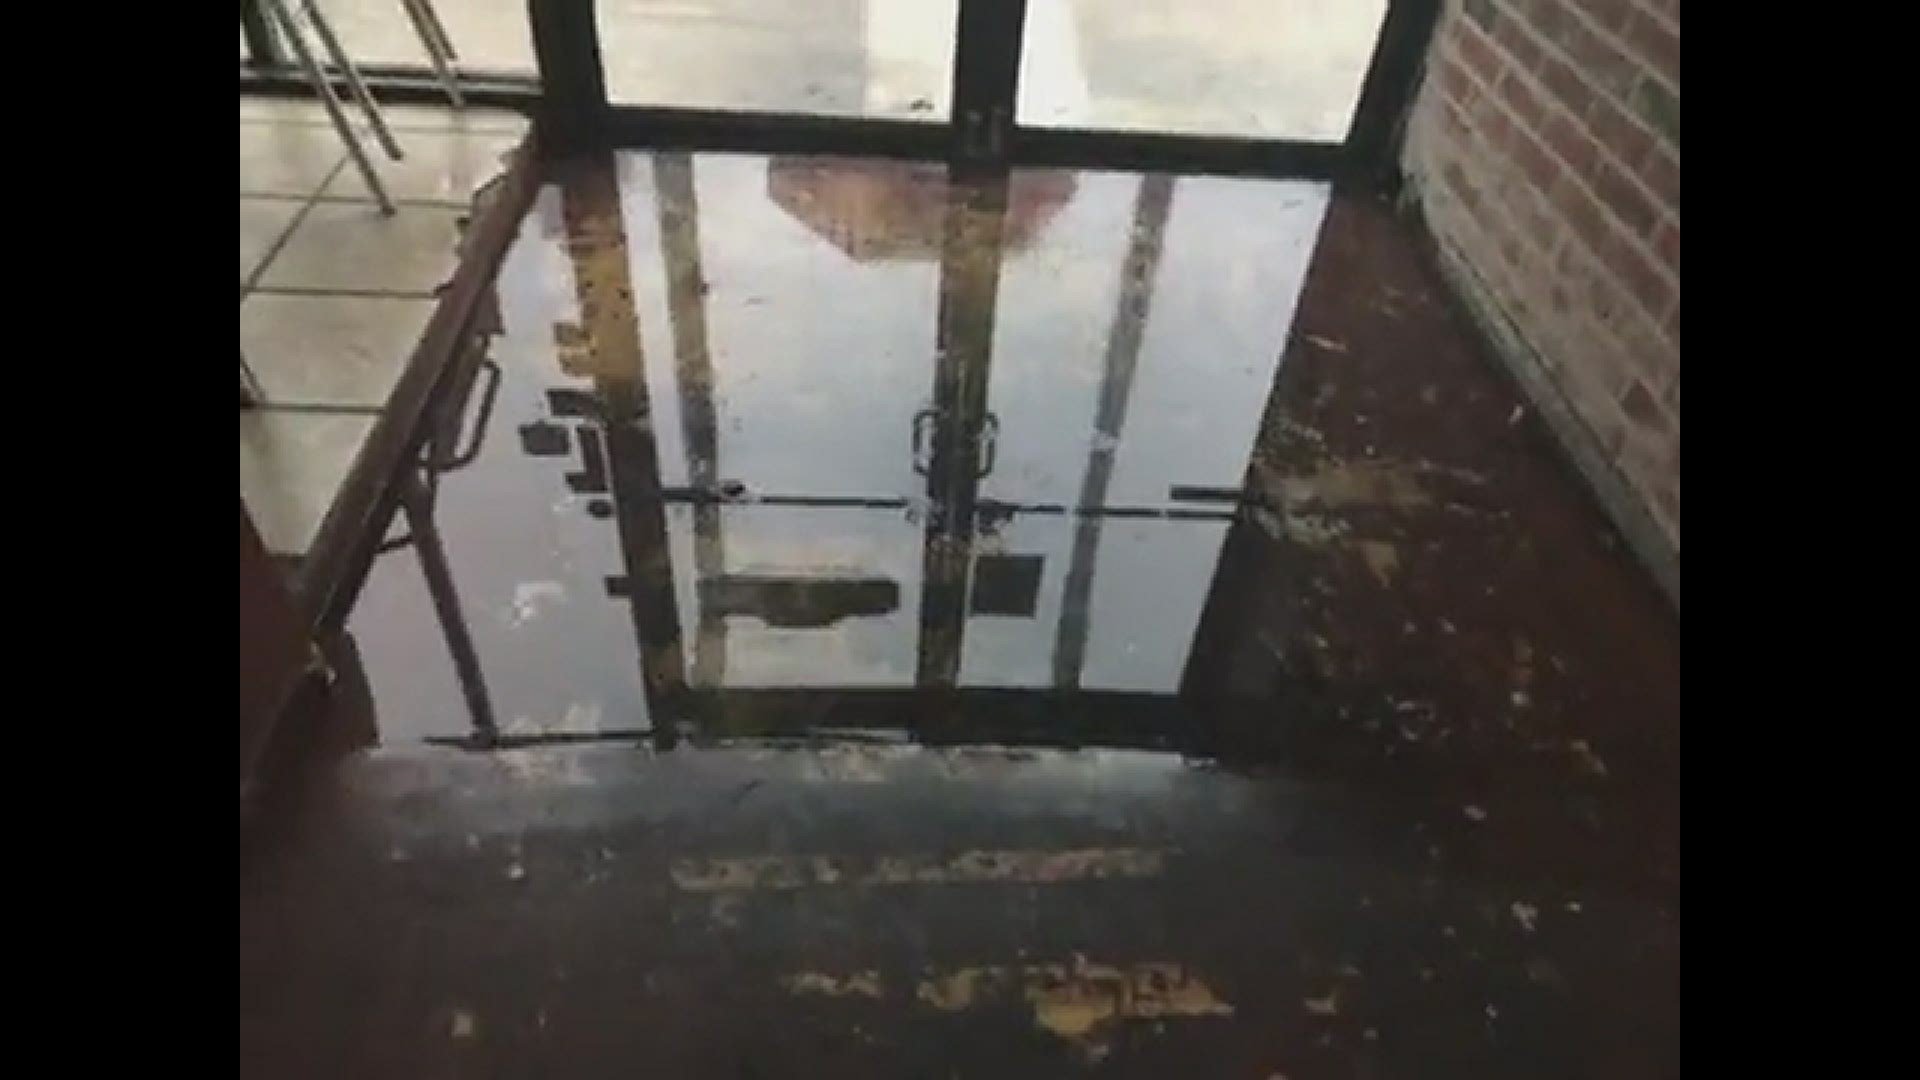 Downpours downtown brought water inside Bay Street Bar & Grill and streaming down the Bay Street sidewalk.
Credit: Mindy Wadley